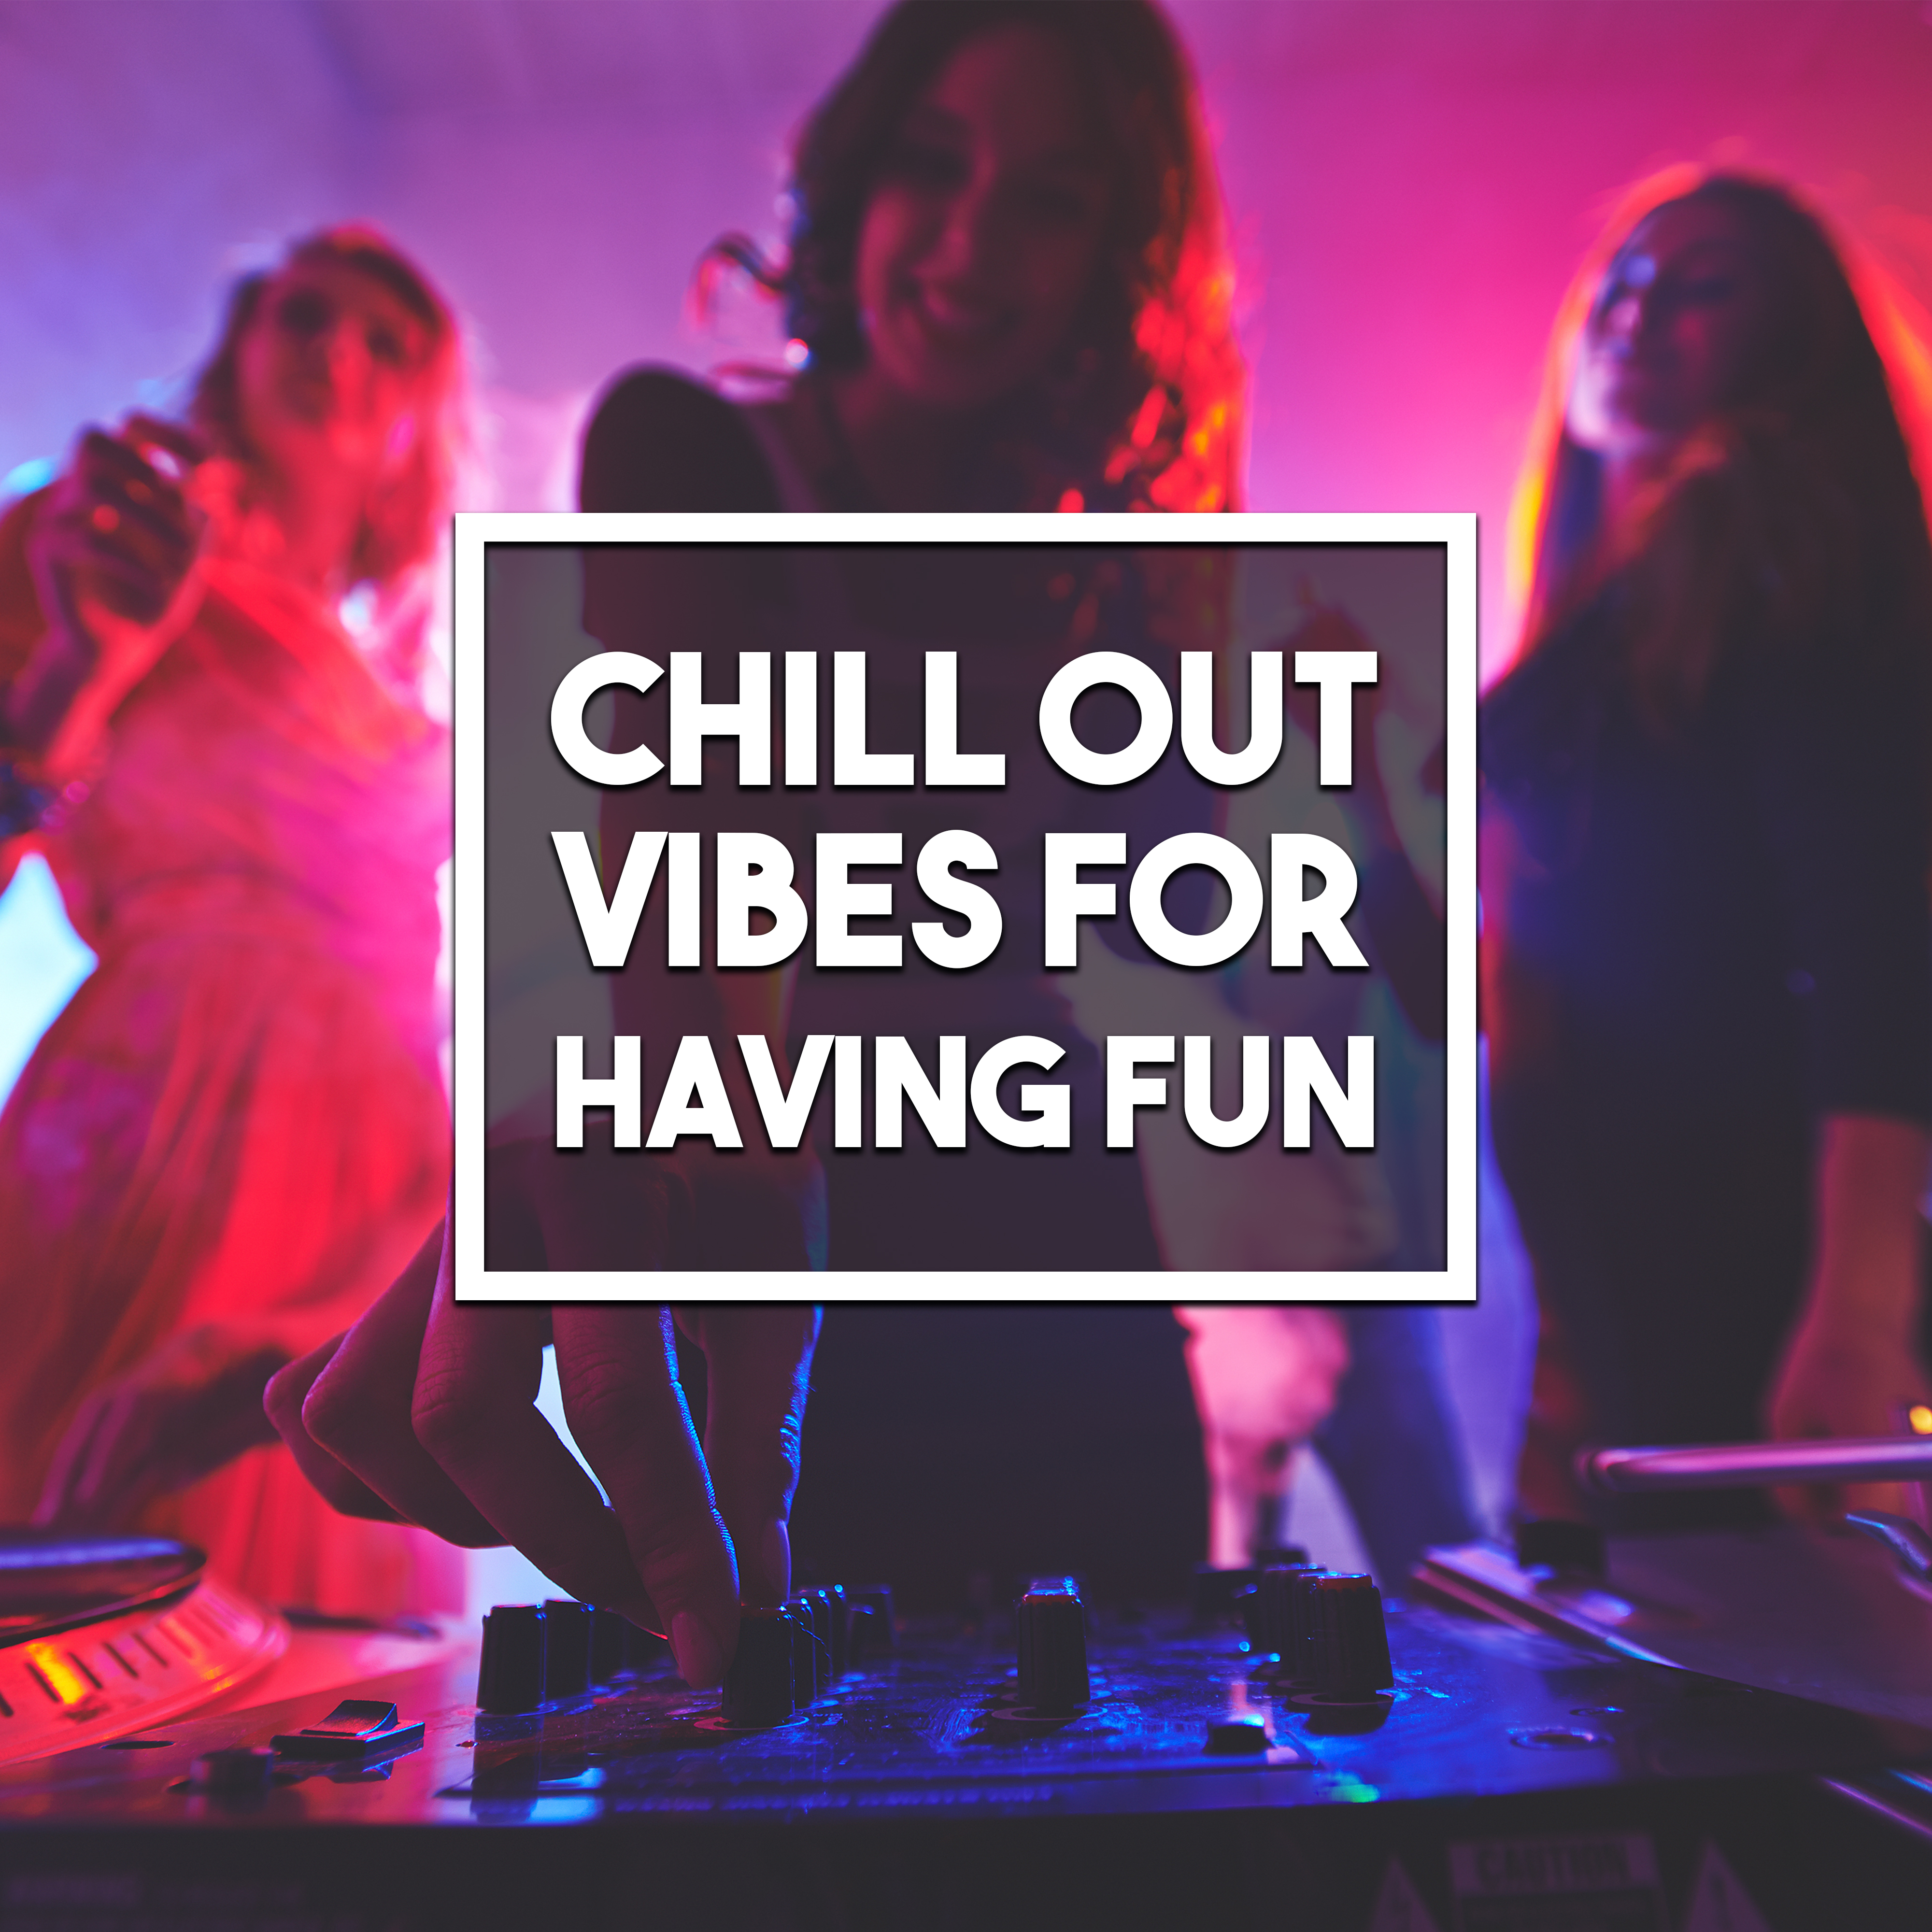 Chill Out Vibes for Having Fun  Ibiza Party Music, Beach Drinks, Summer Love, Dance All Night